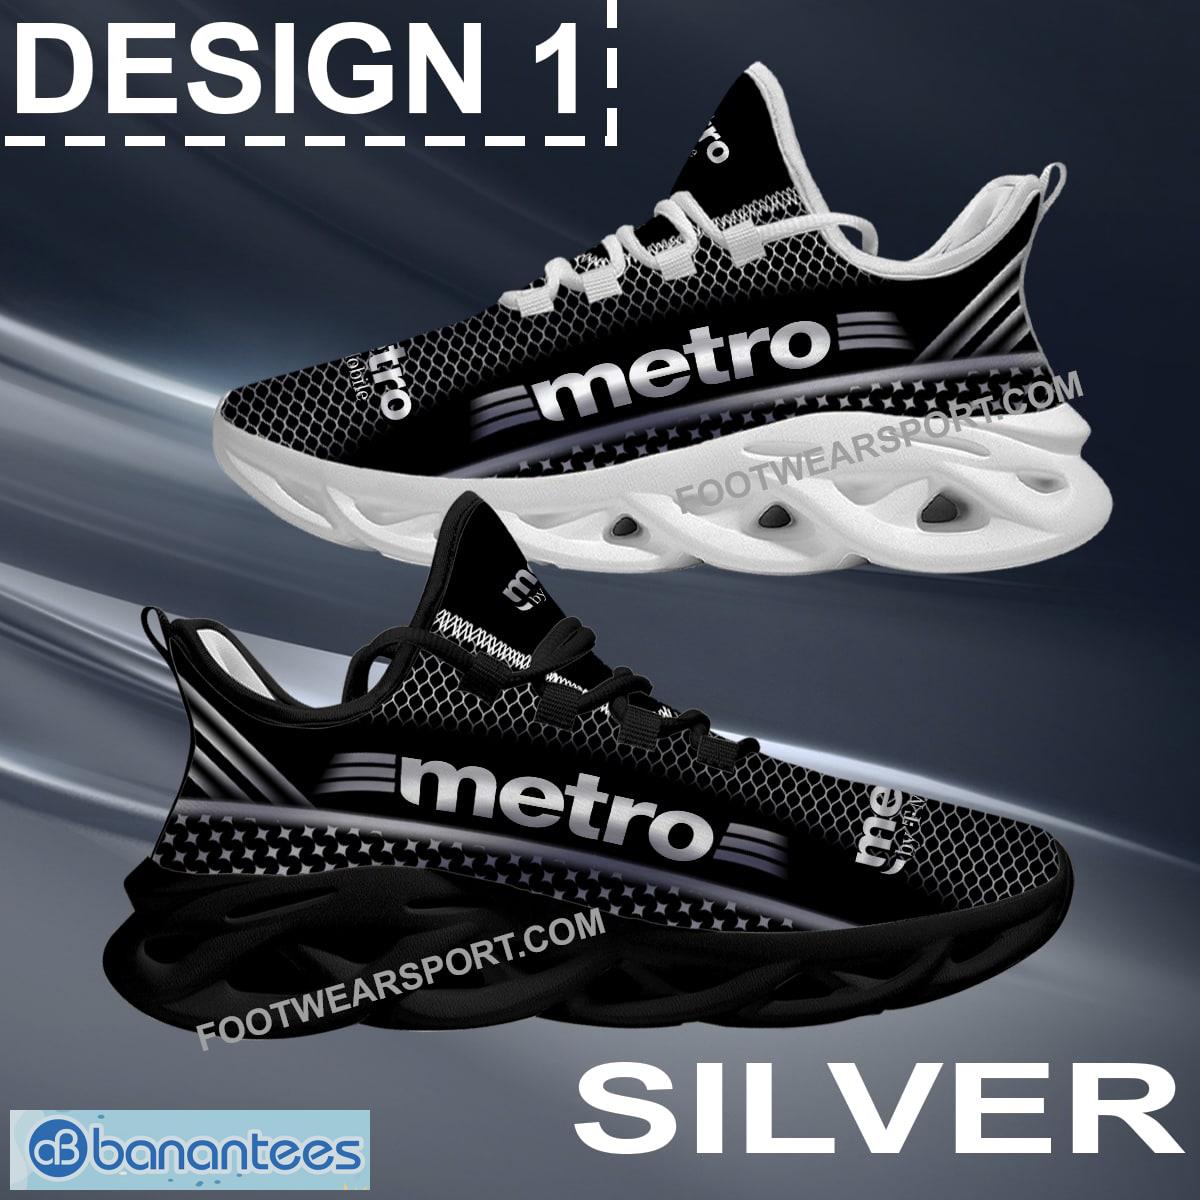 Metro By T Mobile Max Soul Shoes Gold, Diamond, Silver All Over Print Innovative Sport Sneaker Gift - Brand Metro By T Mobile Max Soul Shoes Style 1